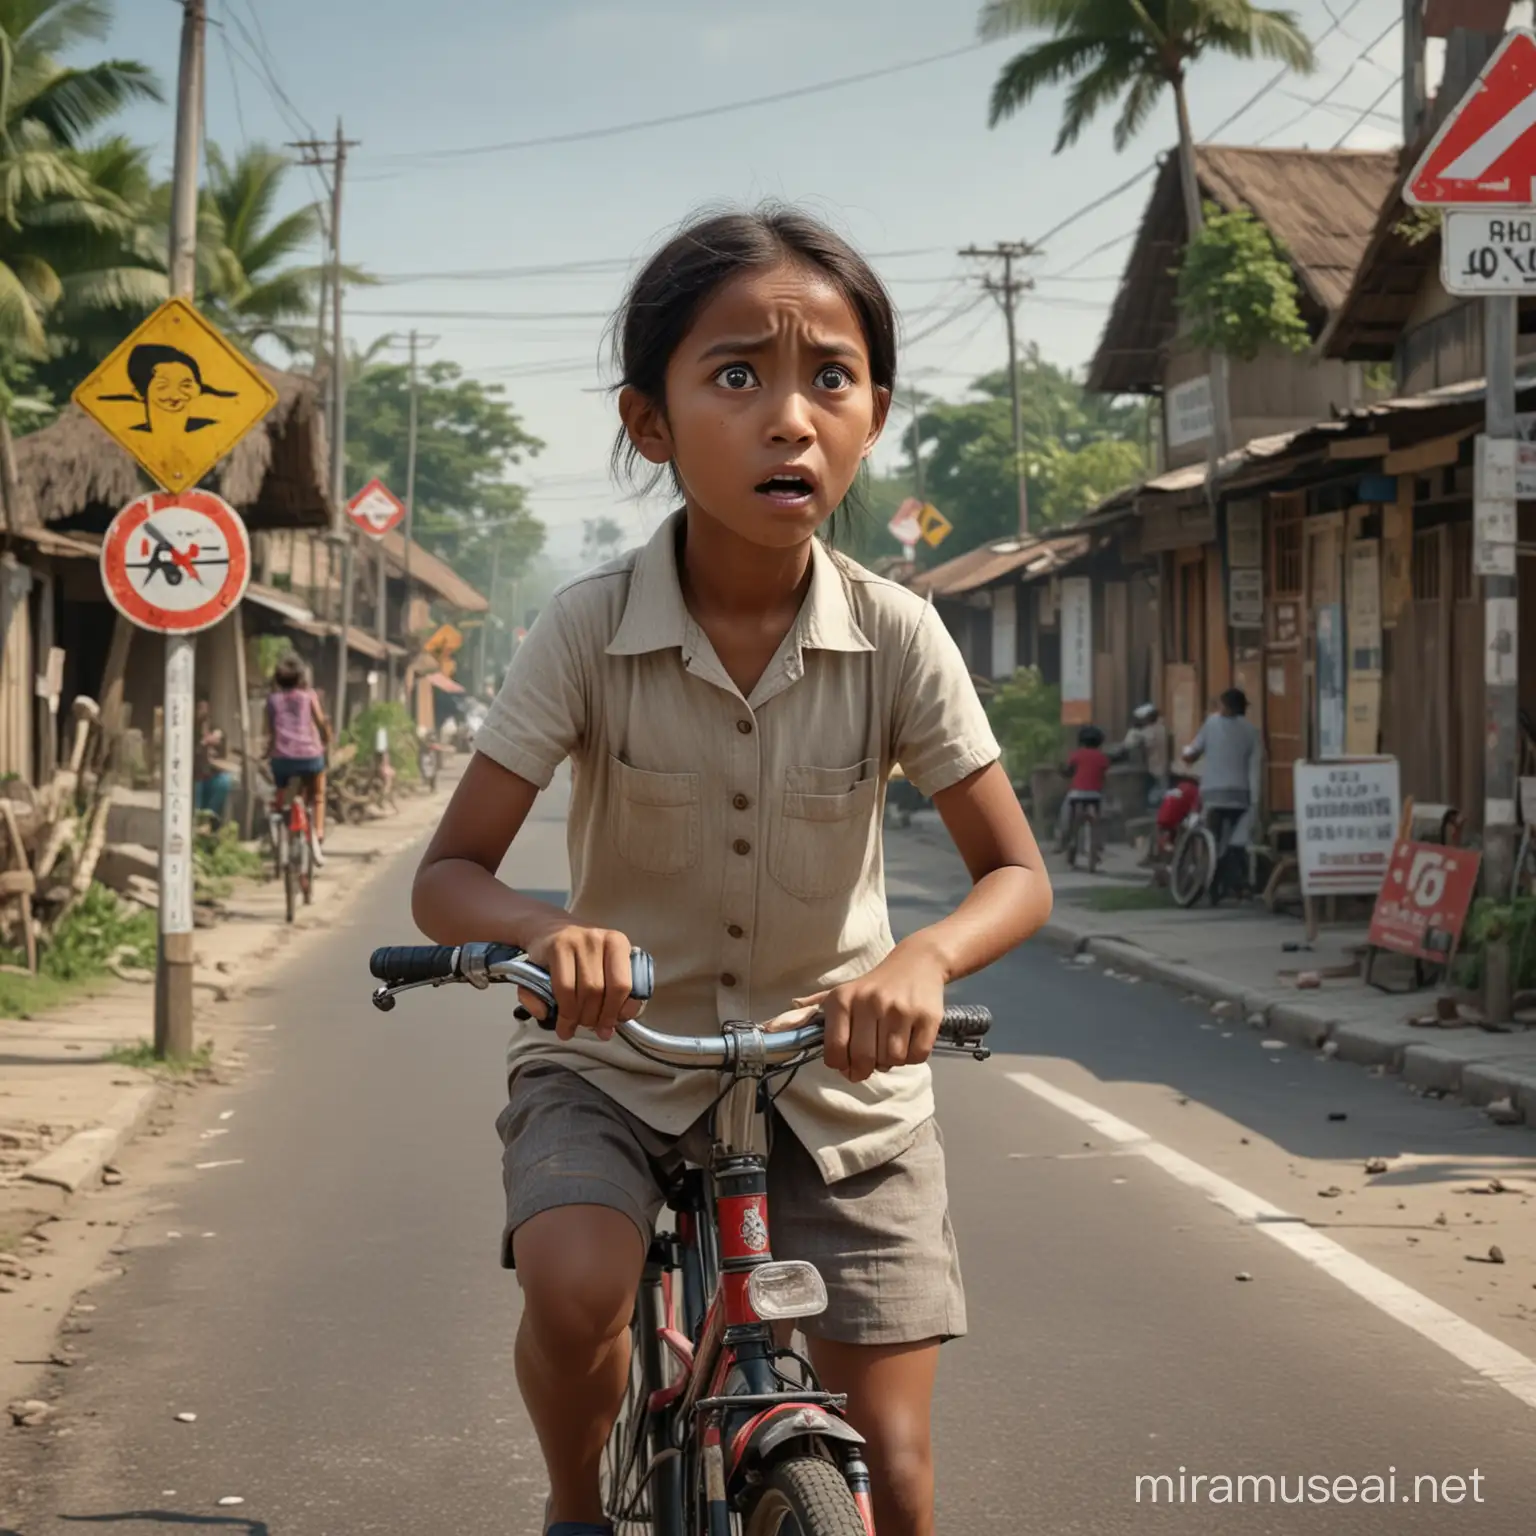 Indonesian Girl Cyclist on Village Road with Road Signs